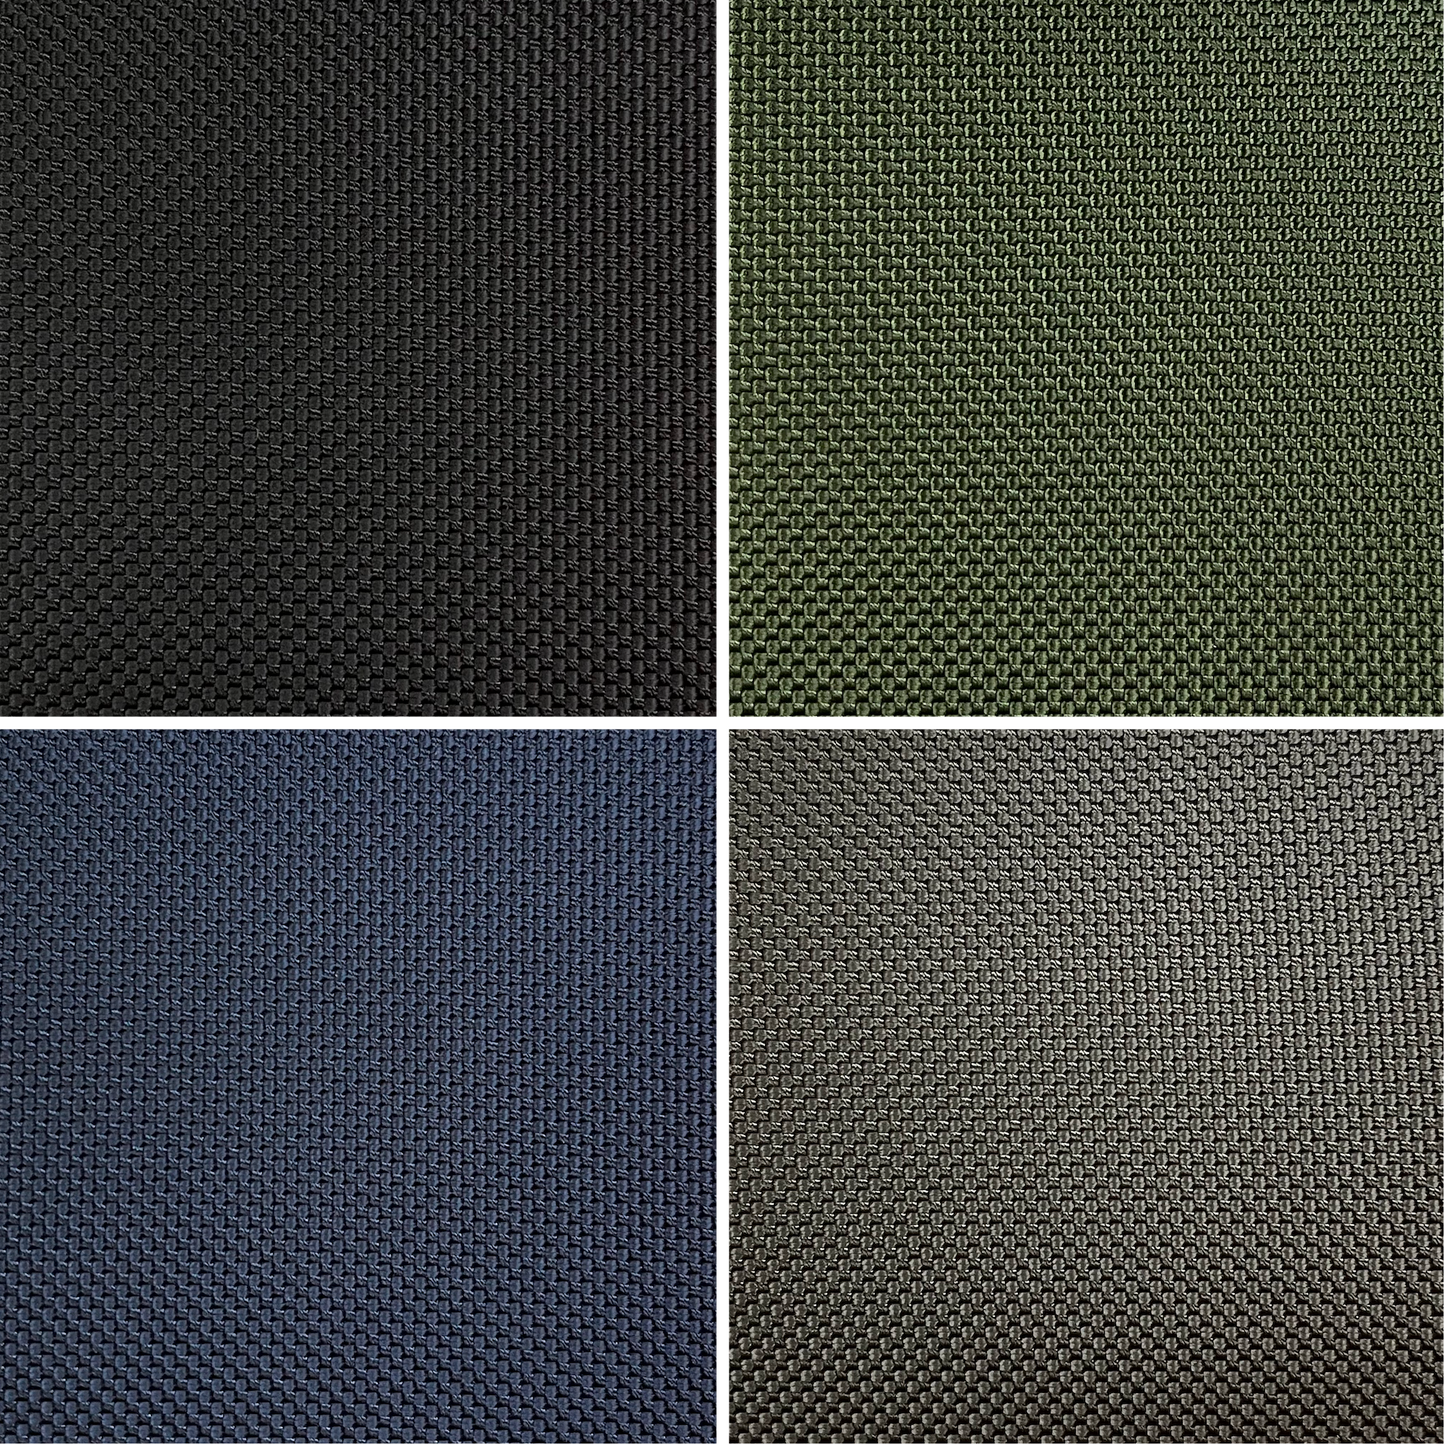 1680 Denier Coated Ballistic Nylon Fabric with Durable Water Repellent Finish (Sold per Yard)